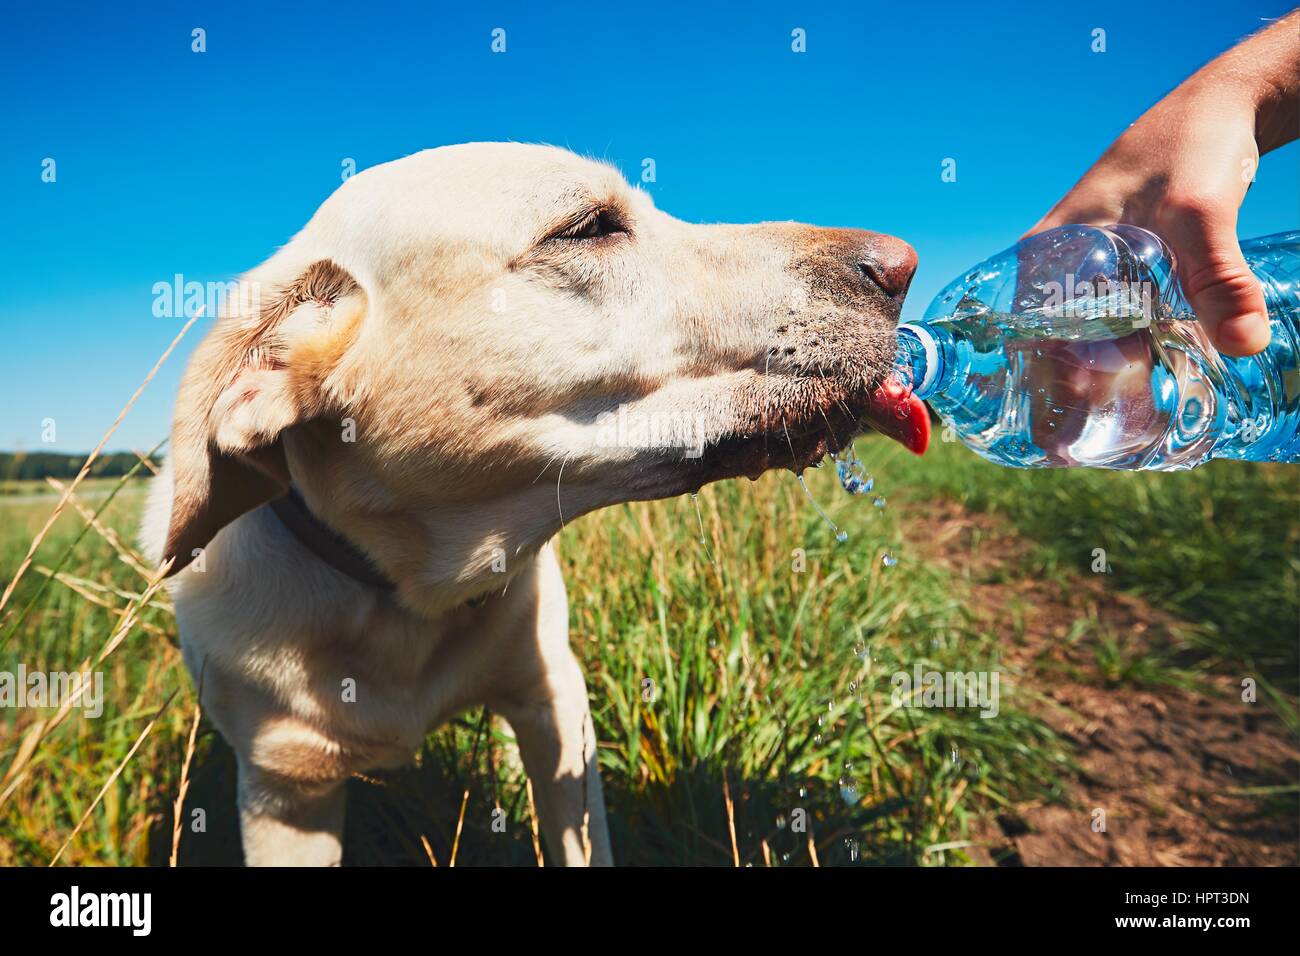 Hot day with dog. Thirsty yellow labrador retriever drinking water from the plastic bottle his owner. Stock Photo